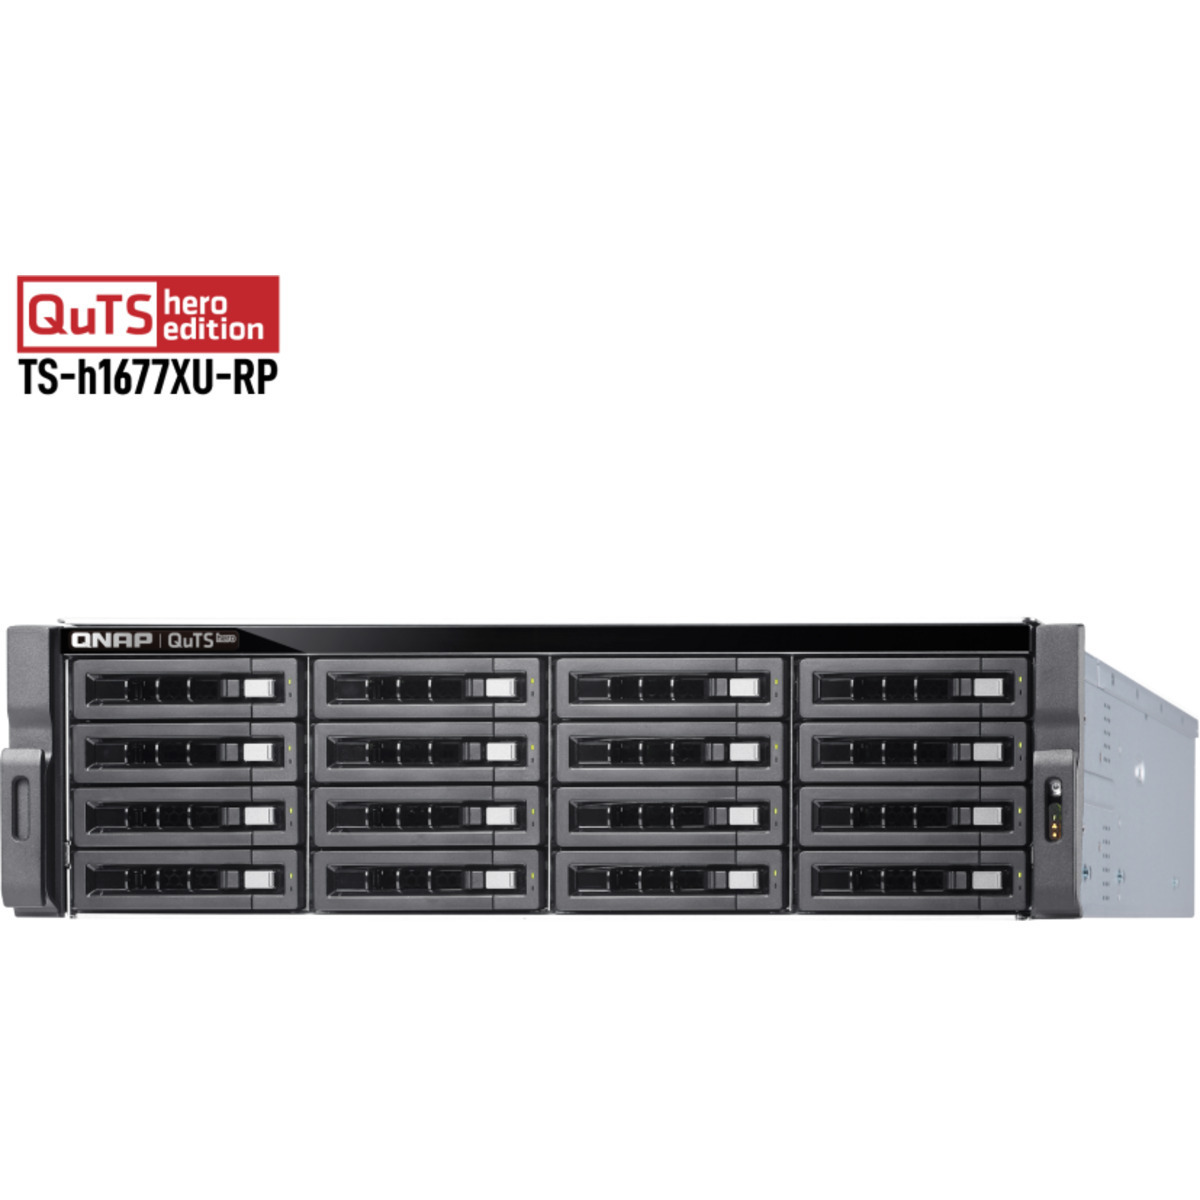 QNAP TS-h1677XU-RP QuTS hero Edition 24tb 16-Bay RackMount Large Business / Enterprise NAS - Network Attached Storage Device 12x2tb Western Digital Red SA500 WDS200T1R0A 2.5 560/530MB/s SATA 6Gb/s SSD NAS Class Drives Installed - Burn-In Tested TS-h1677XU-RP QuTS hero Edition